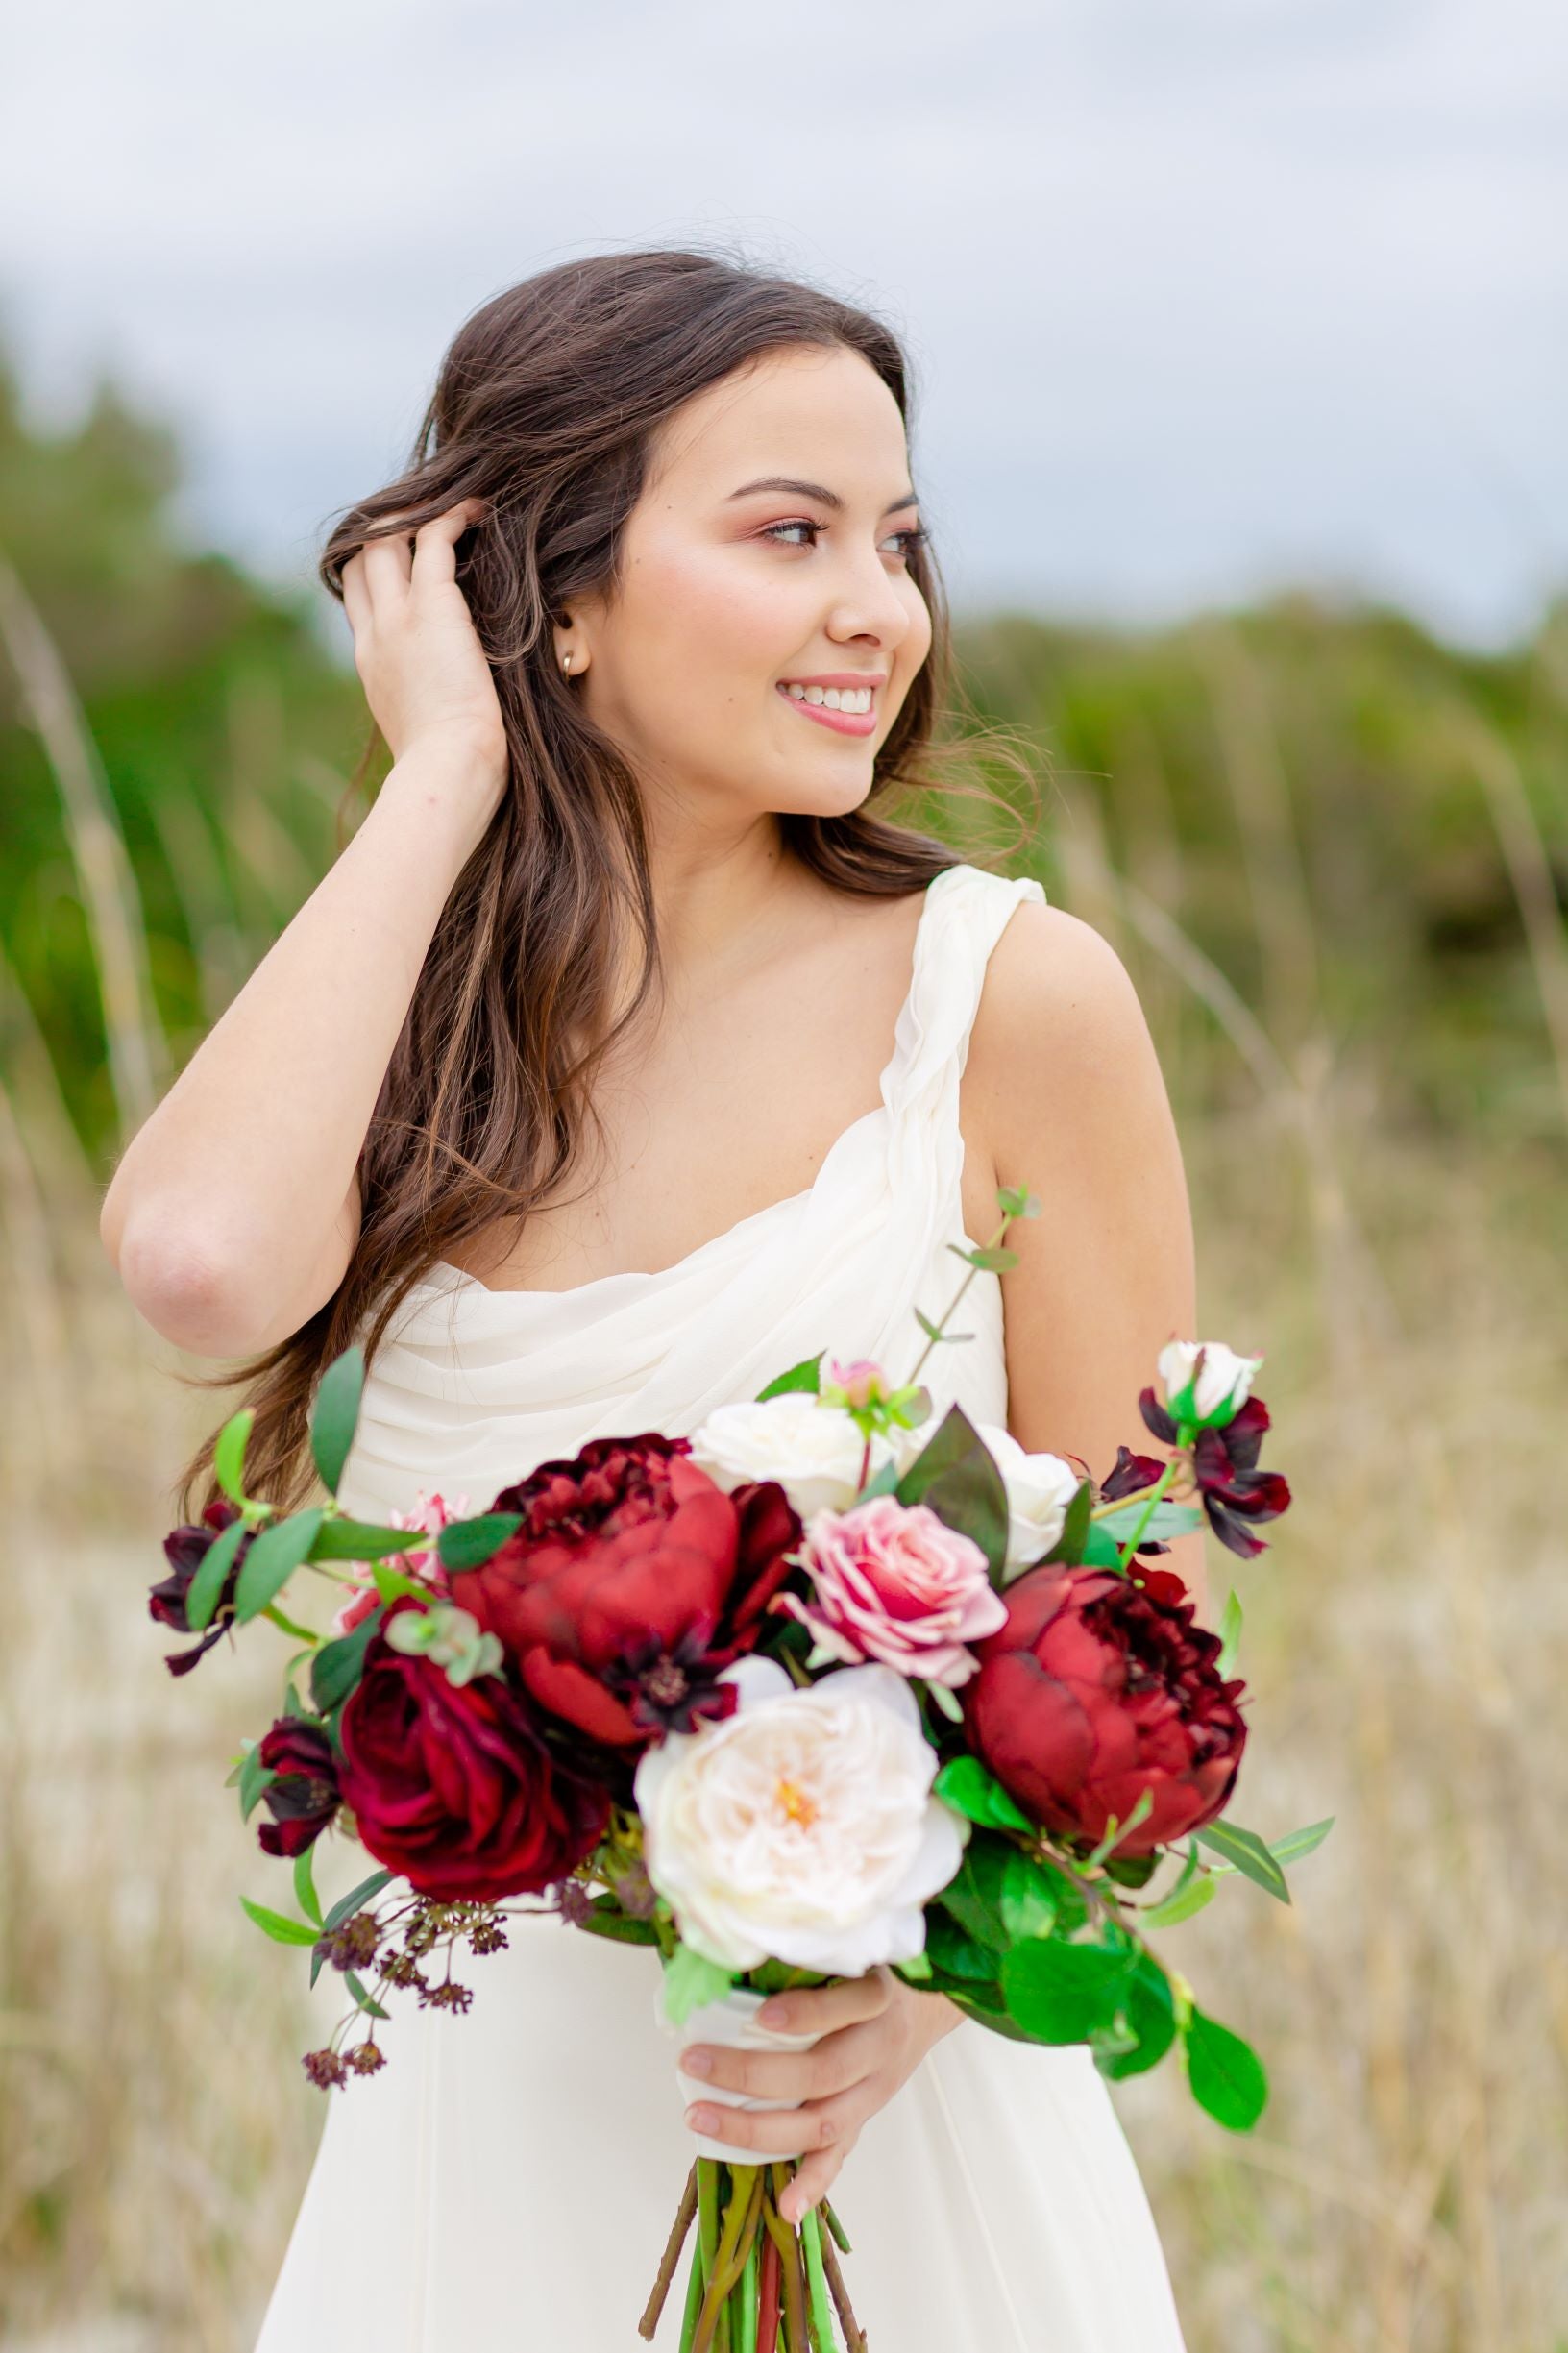 Tuscany Burgundy Pink - Bride Bouquet - With DEEP Burgundy Blooms